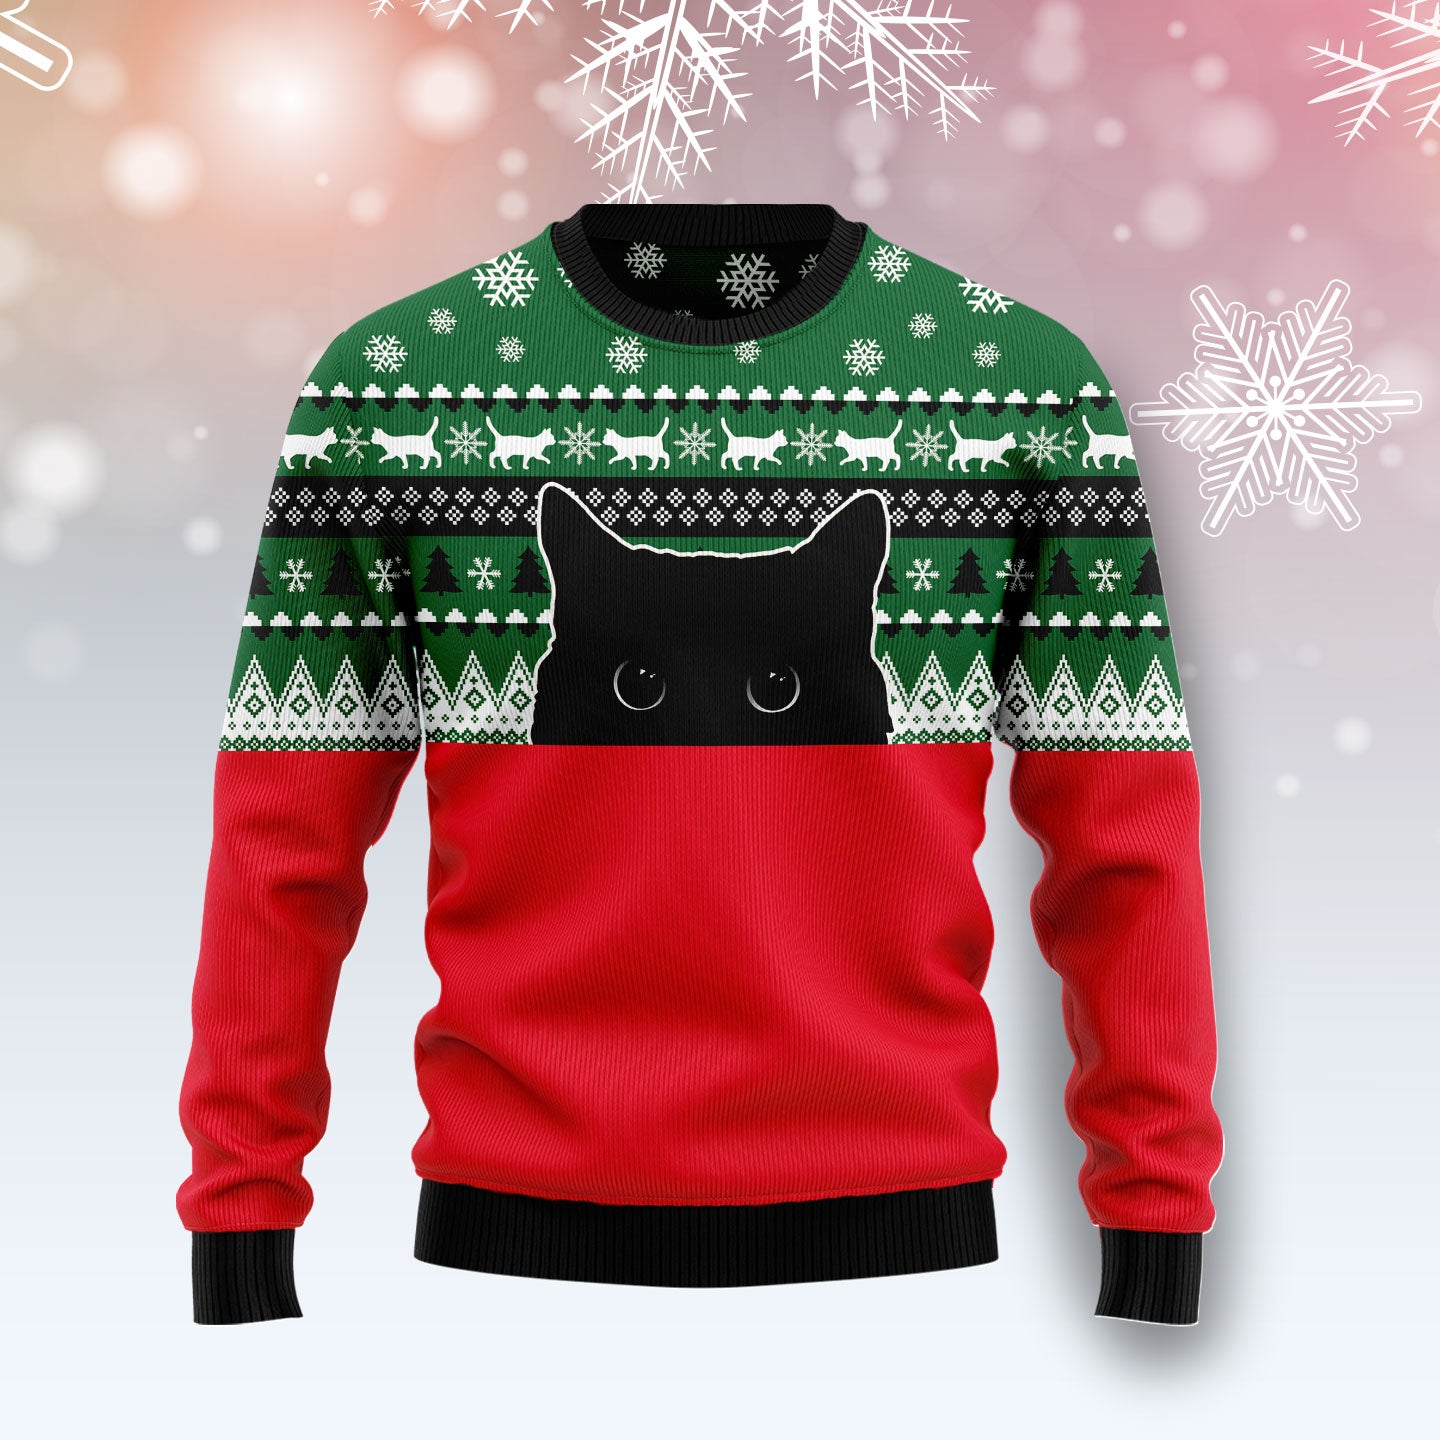 Meow Meow Black Cat G51124 Ugly Christmas Sweater unisex womens & mens, couples matching, friends, cat lover, funny family sweater gifts (plus size available)